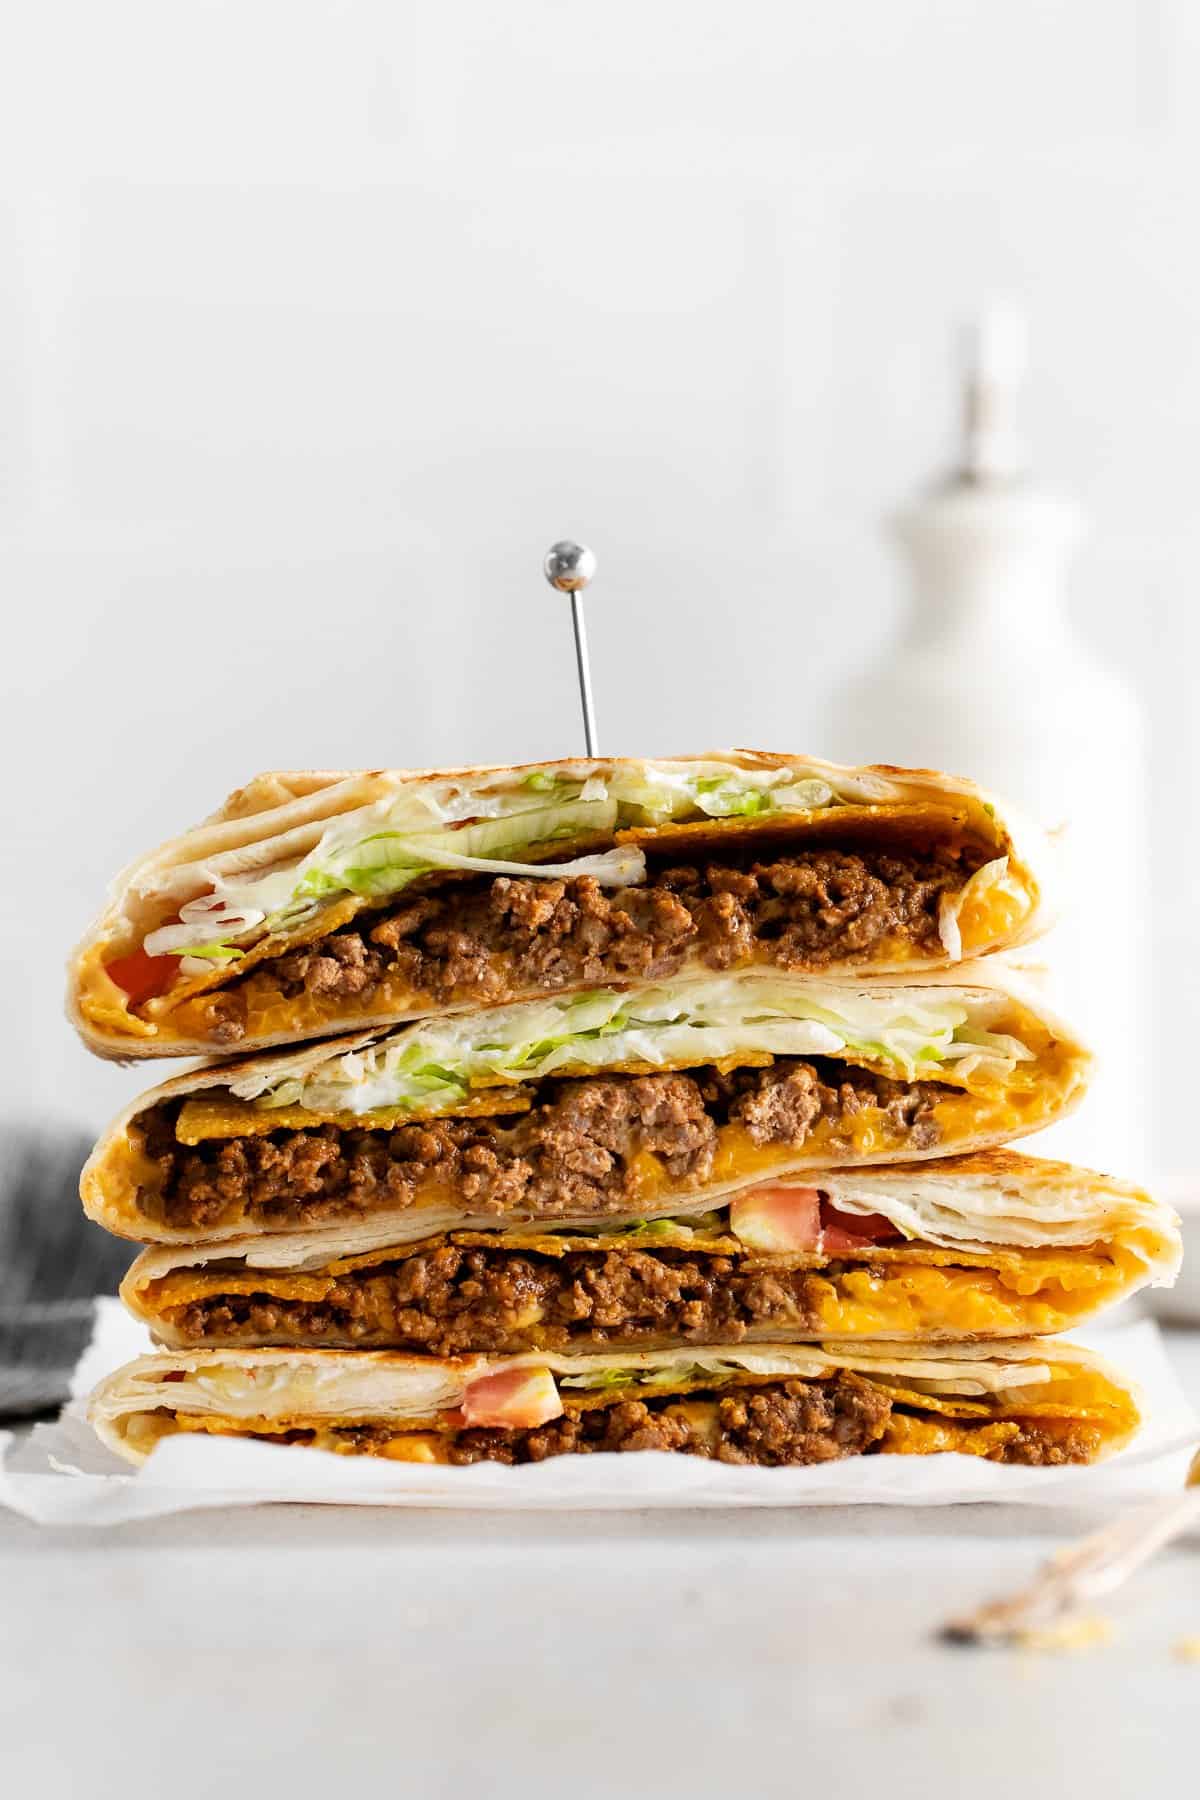 Crunchwrap supreme stacked on a plate.